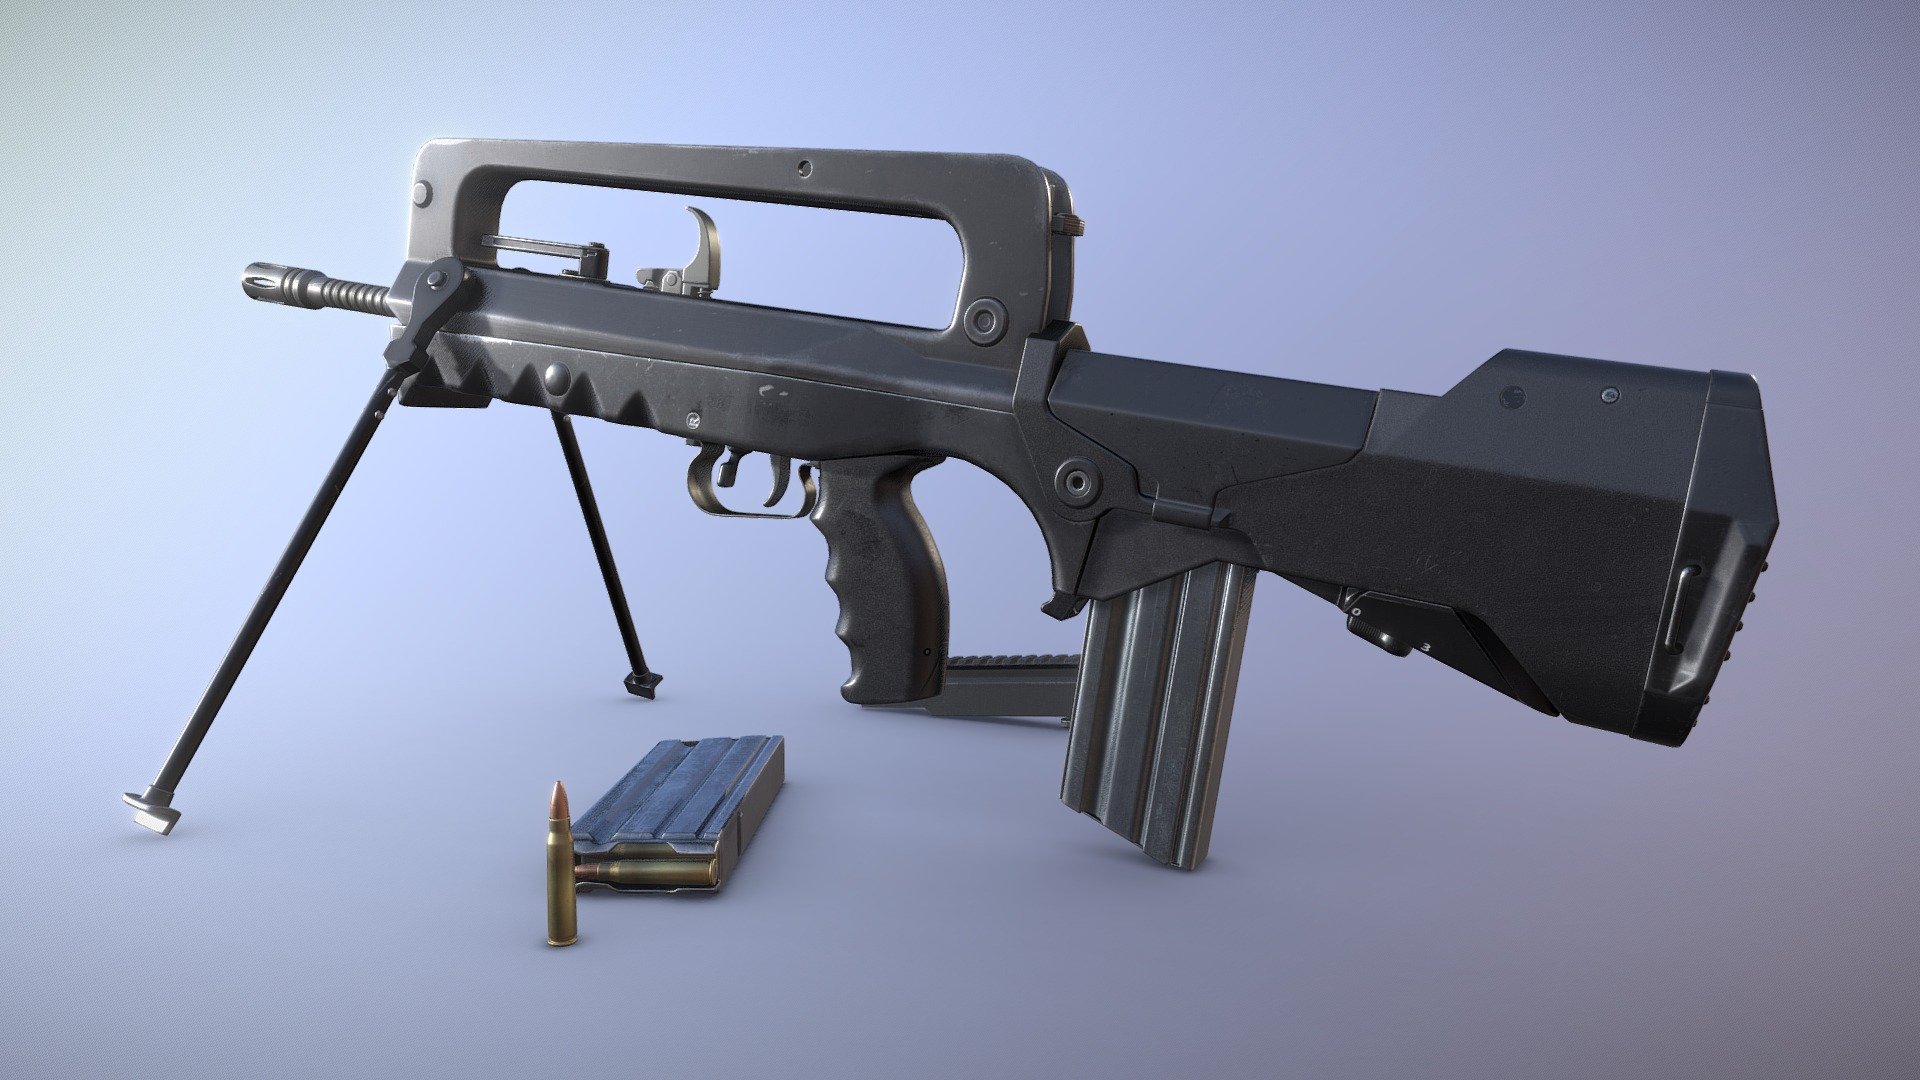 FAMAS F1 designed for PBR engines.

Originally modeled in 3ds Max 2021. Download includes .max, .fbx, .obj, .dae, metal/roughness PBR textures, textures for Unity and Unreal Engines, and additional texture maps such as curvature, AO, and color ID.

Comes with 5.56mm cartridges and optional rail accessory.

Specs


Scaled to approximate real world size (centimeters)
Dimensions: 76 x 6 x 27cm
Mesh is in tris and quads, no n-gons.

Objects separated and ready for animation. Moveable parts include:


Bipod
Bolt
Trigger
Magazine
Magazine Follower
Charging Handle
Magazine Release
Safety
Fire Selector
Rear Sight Leafs

Textures


4096x4096 Base Color, Roughness, Metallic, Normal, AO for the gun
512x512 PBR set for the 5.56mm cartridge
1024x1024 PBR sets for the rail attachment

Unity Engine 5 Textures: AlbedoTransparency, MetallicSmoothness, Normal, Occlusion

Unreal Engine 4 Textures: BaseColor, Normal, RoughnessMetallicAO - FAMAS F1 Rifle - Buy Royalty Free 3D model by Luchador (@Luchador90) 3d model